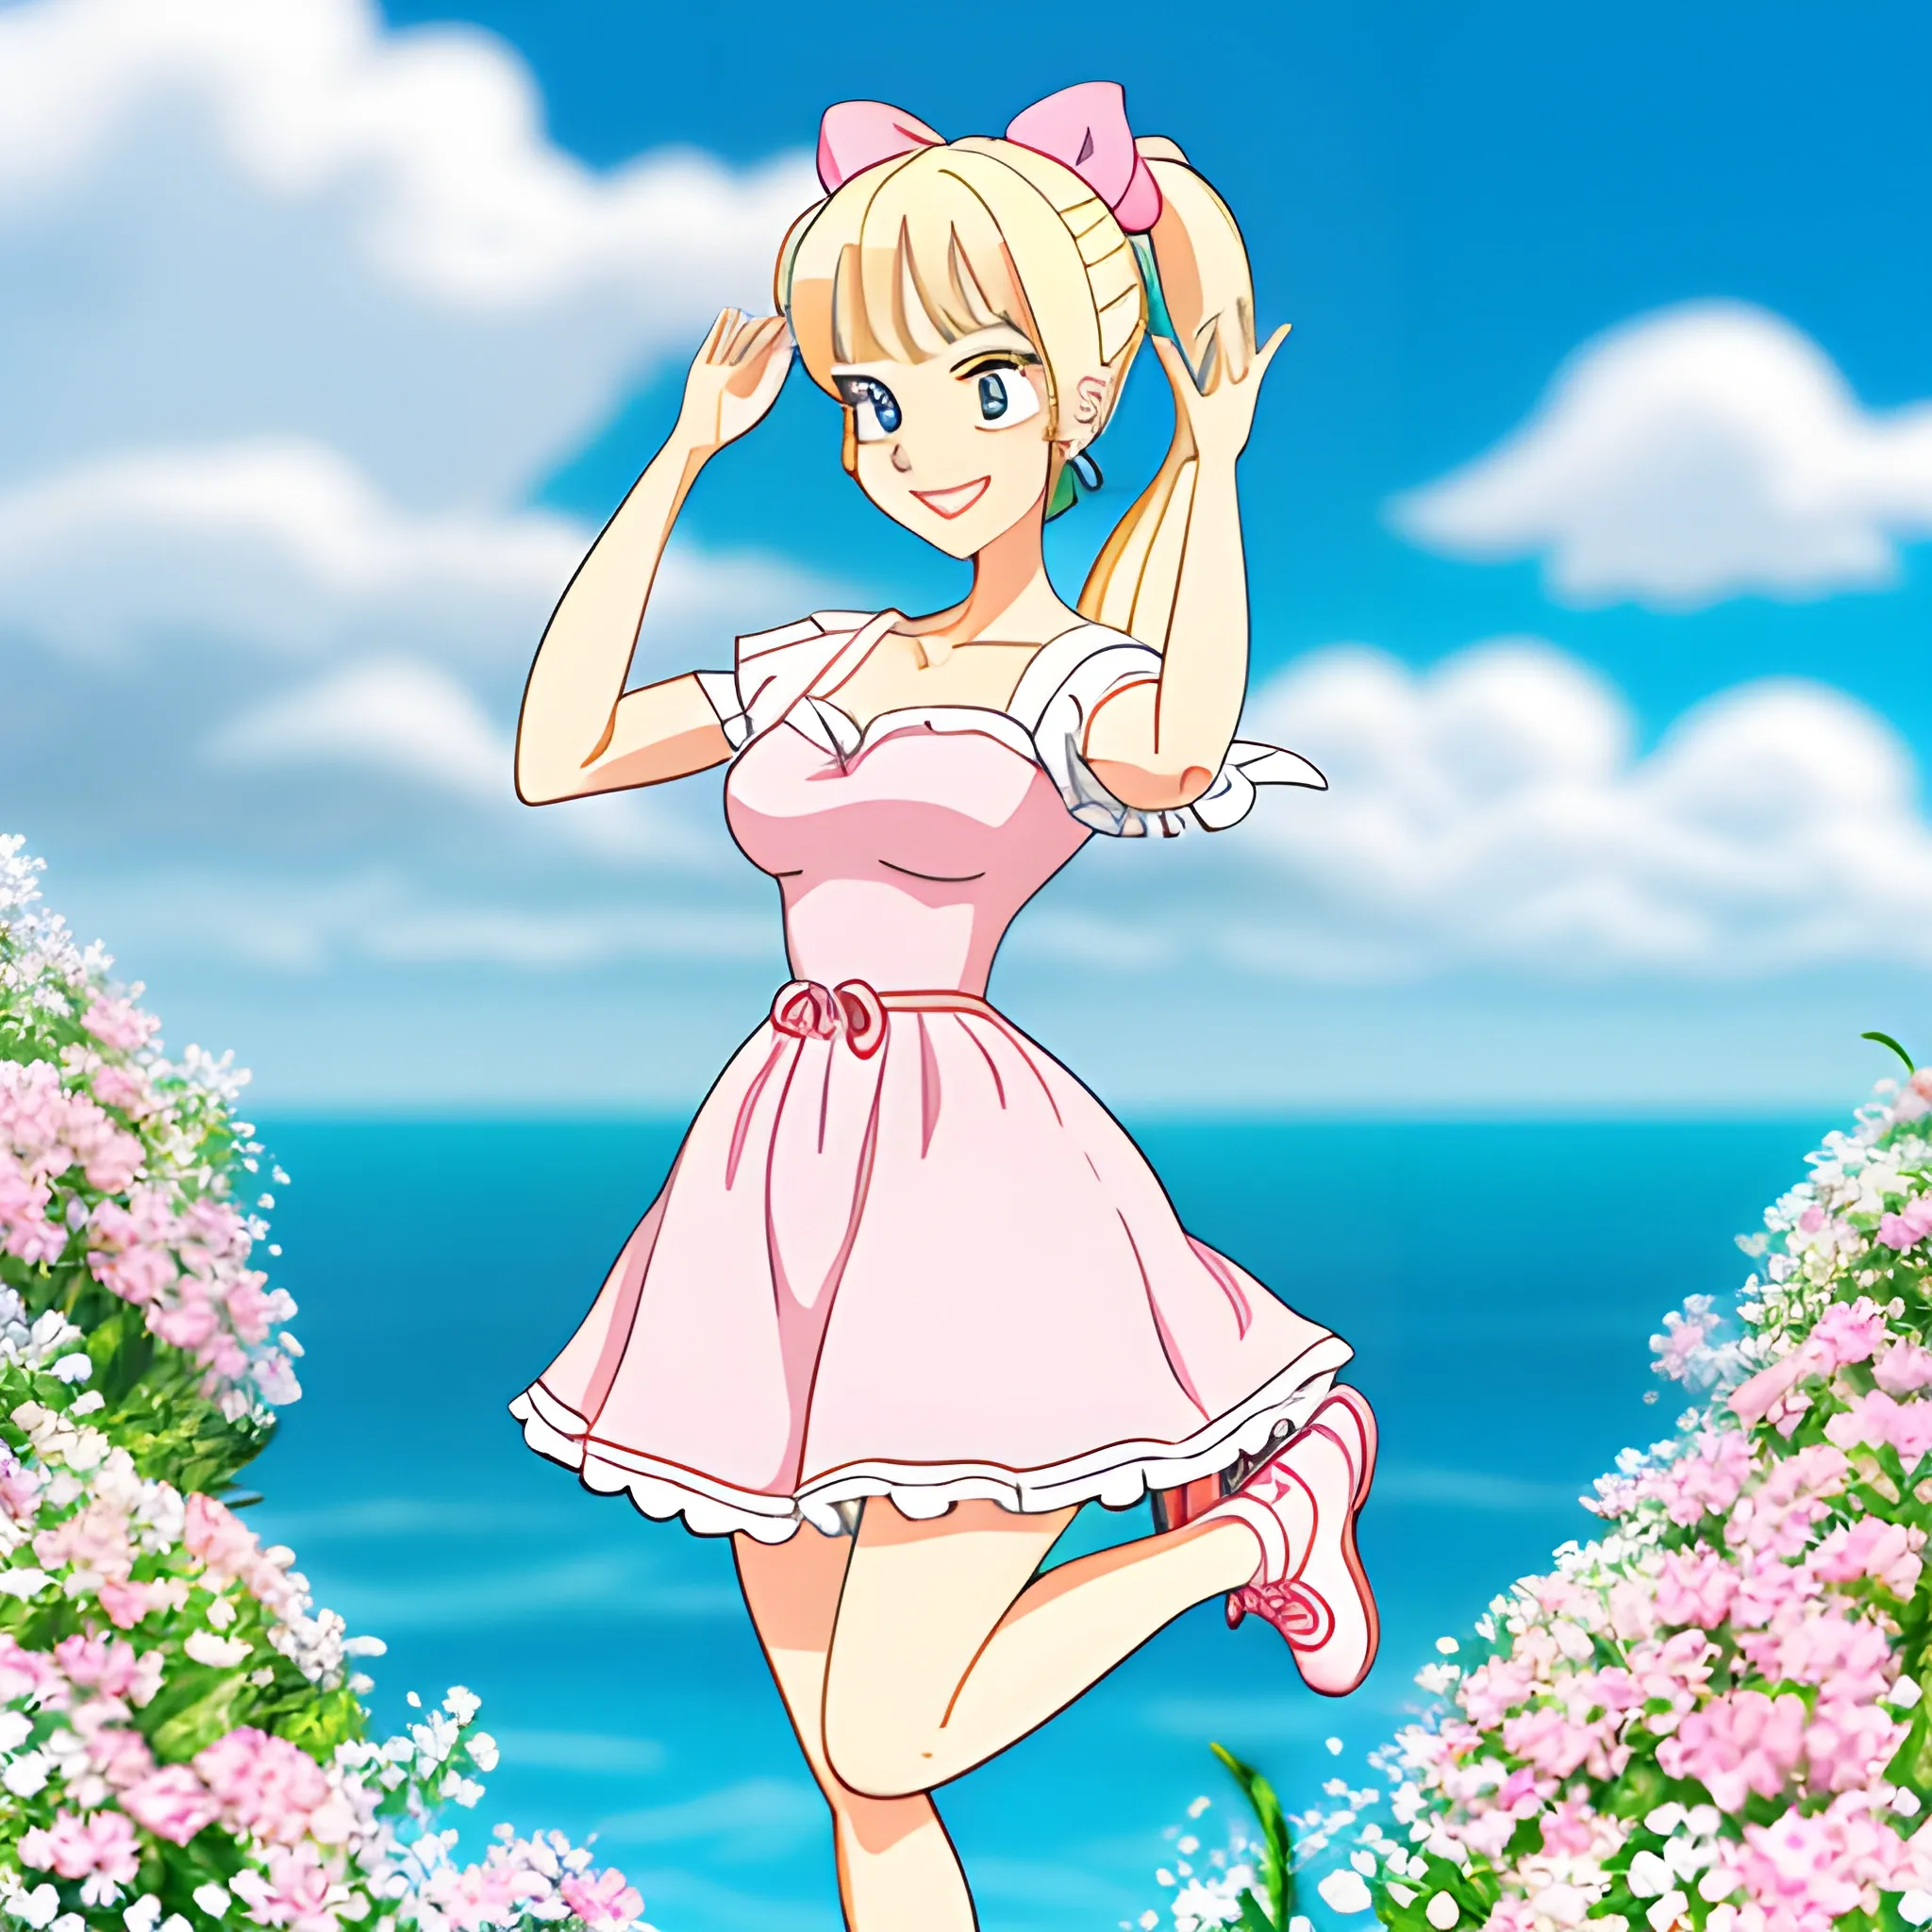 studio ghibli, where's waldo style,Gelda,8-10 years old,girl,blonde hair,twin ponytails,round face,fair skin,sparkling eyes,small cute nose,short stature,slim,agile,pink and white dress,white flowers,pink ribbons,white princess shoes,bow knot,little accessories,pink gem hair clip,white lace handkerchief,sweet,vibrant,young girl,brave,kind-hearted,fairytale princess,warm,dreamy,beautiful detailed eyes,beautiful detailed lips,extremely detailed eyes and face,longeyelashes, Cartoon, Cartoon,happy face